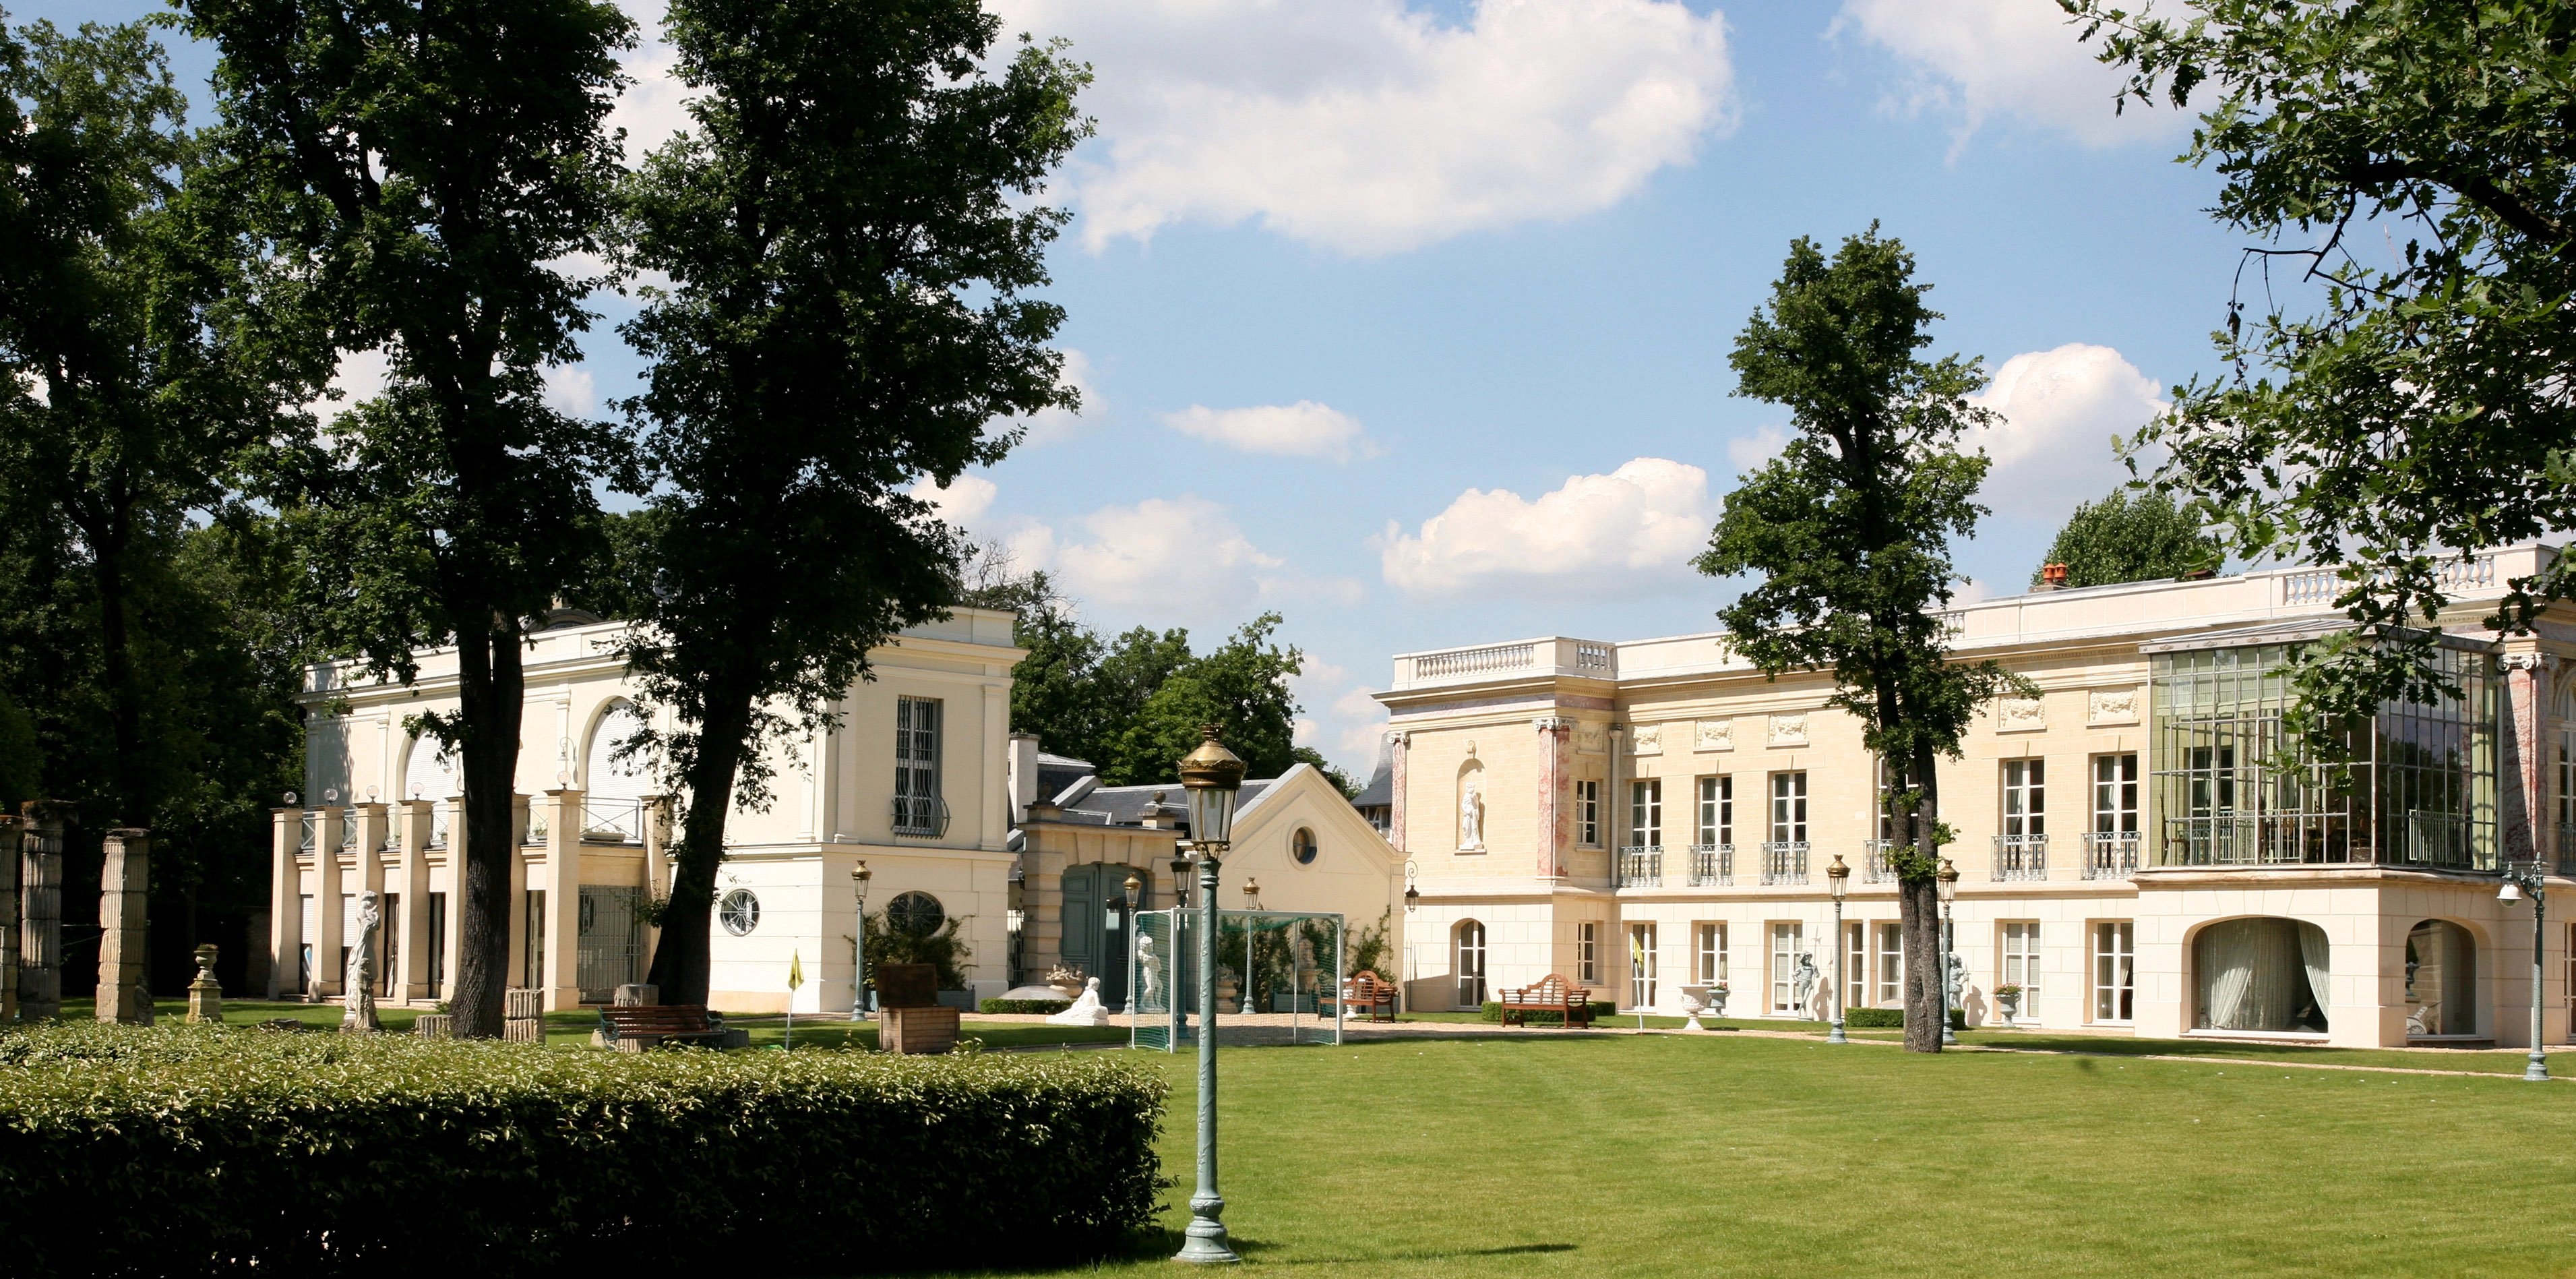 A sublime Palais inspired by Grand Trianon Palace, 20 min from Paris_1602